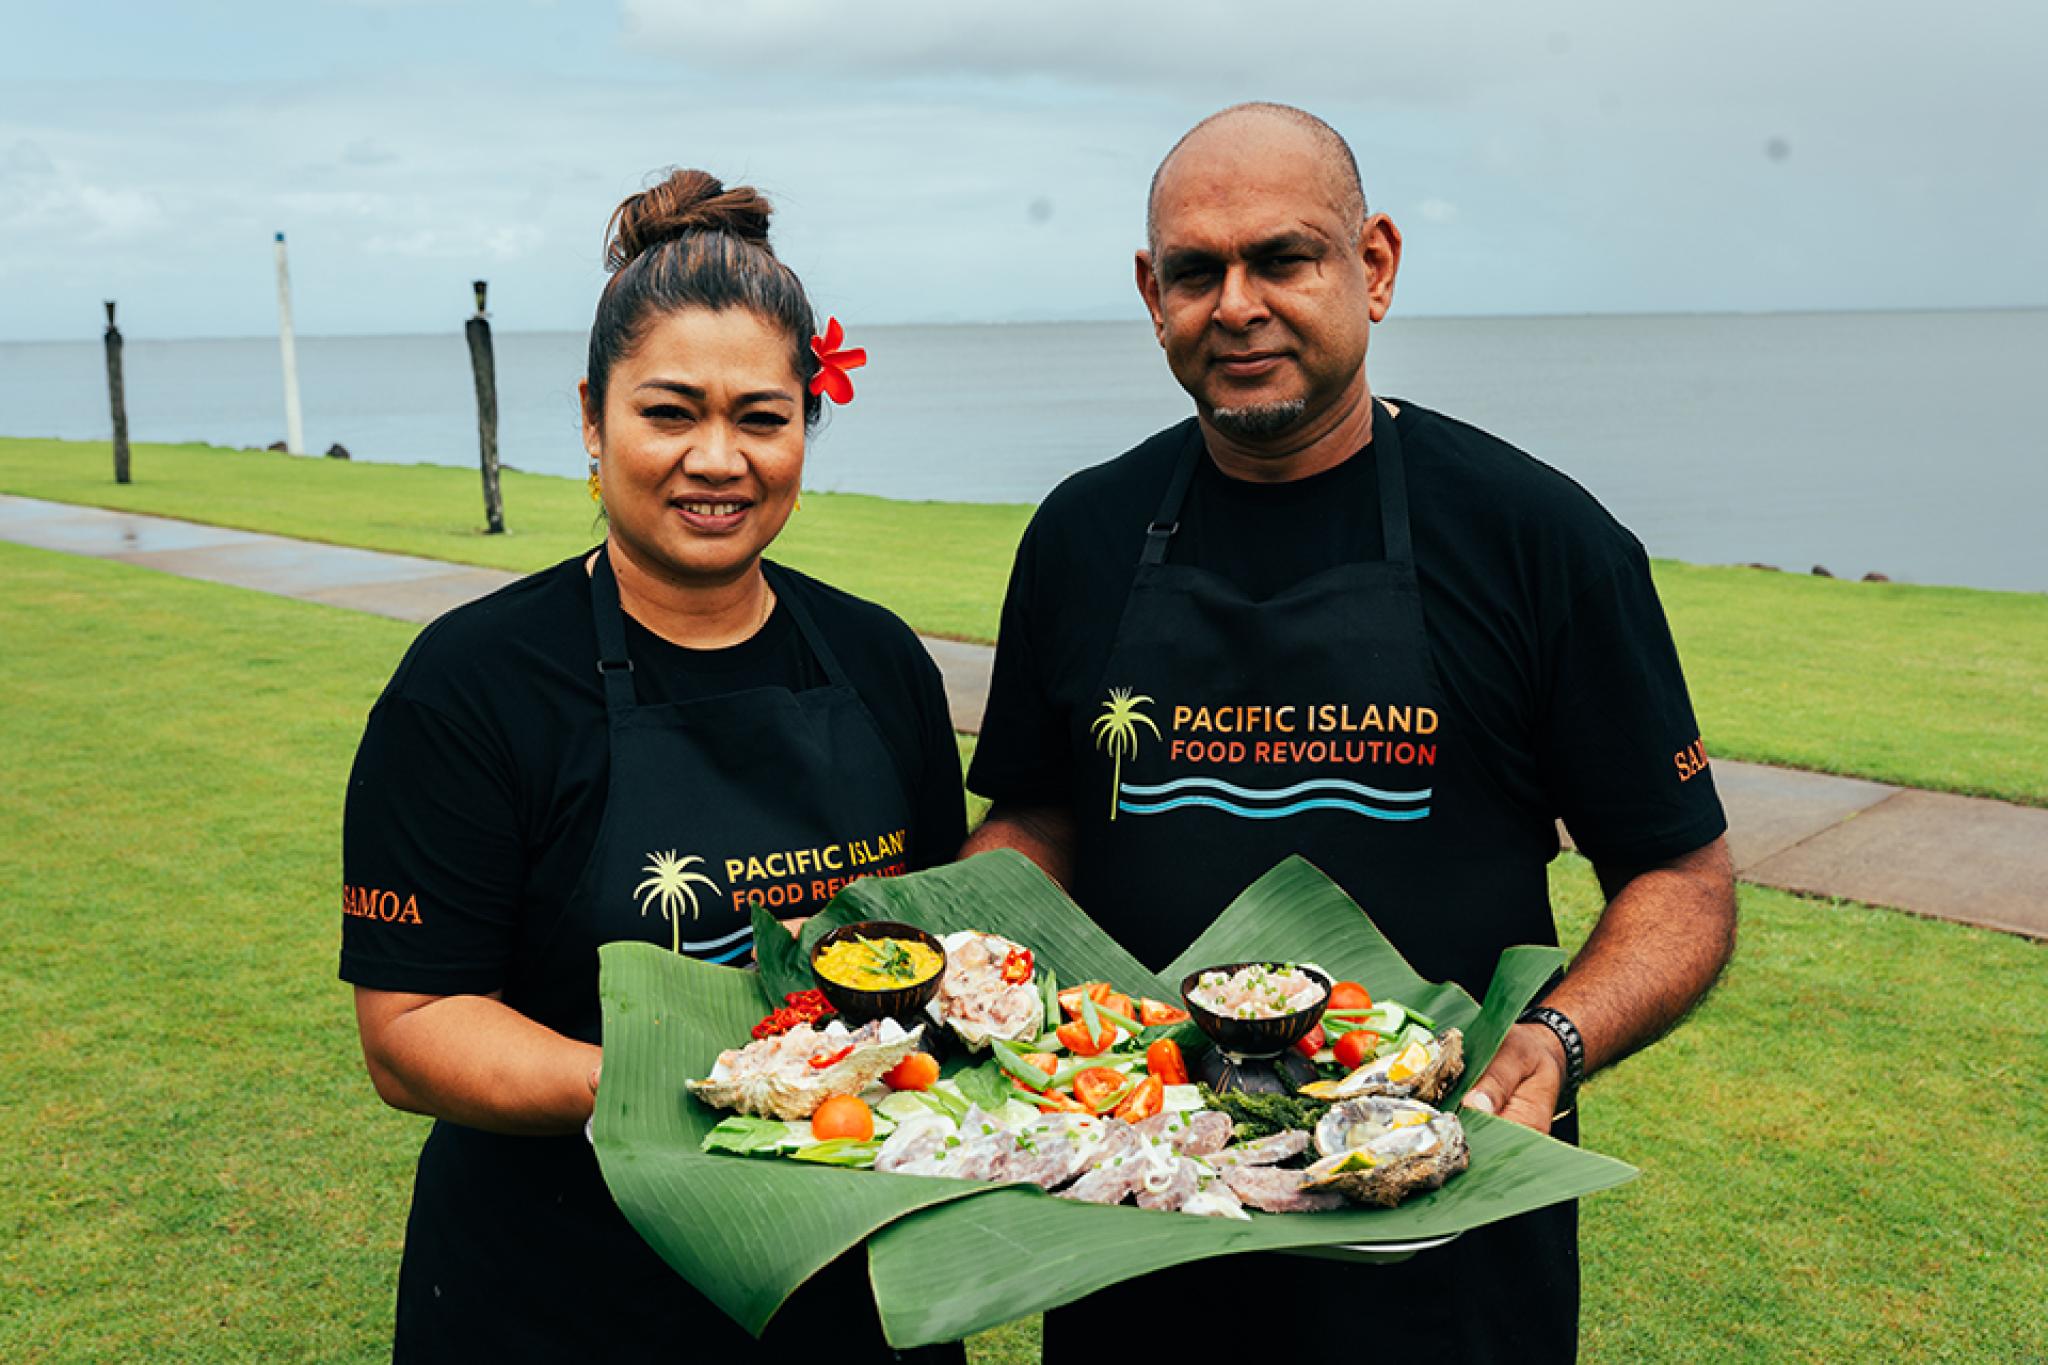 TV hosts holding food image by Pacific Island Food Revolution